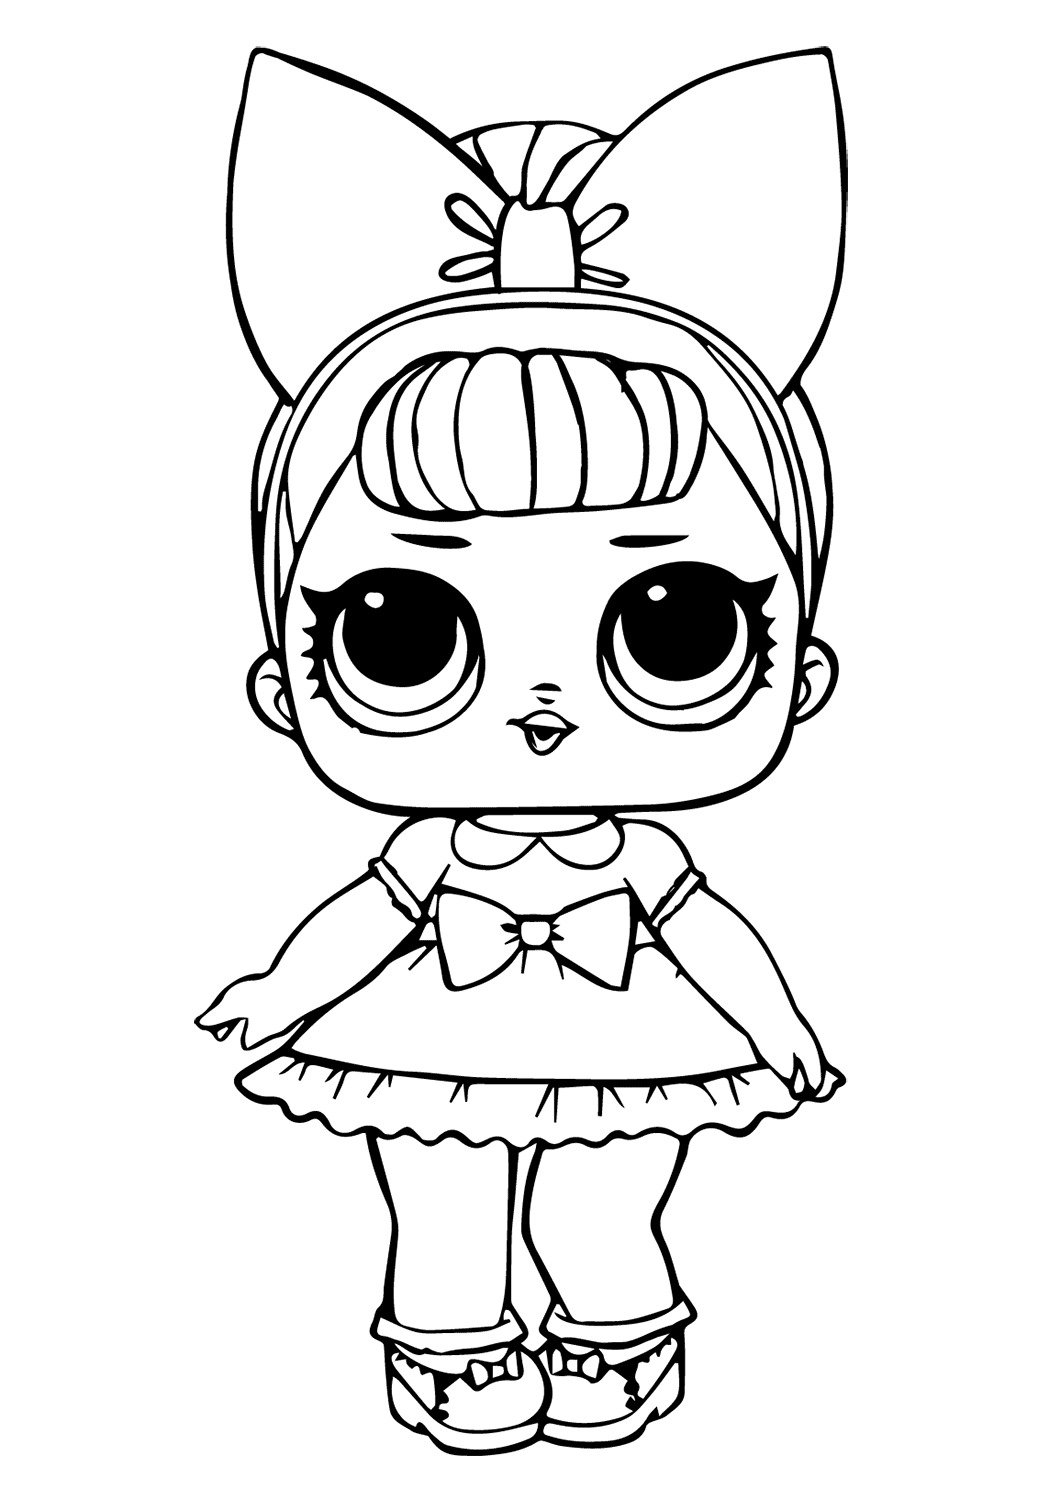 Lol Surprise Doll Coloring Pages   Coloring Pages For Kids And Adults